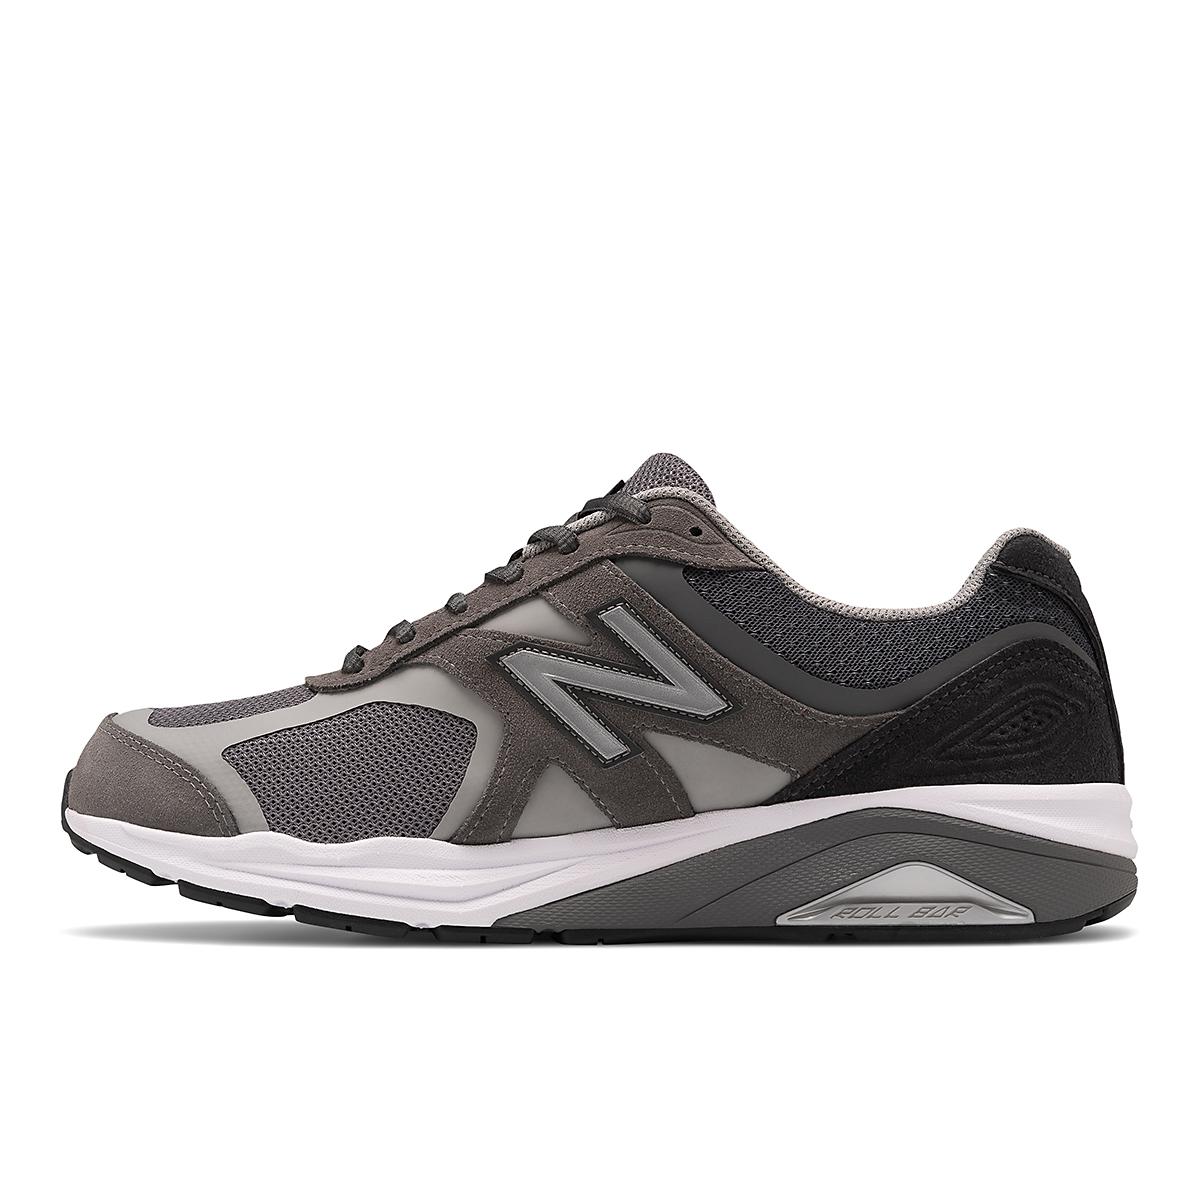 New Balance Synthetic 1540v3 Walking Shoe in Grey (Gray) for Men - Lyst